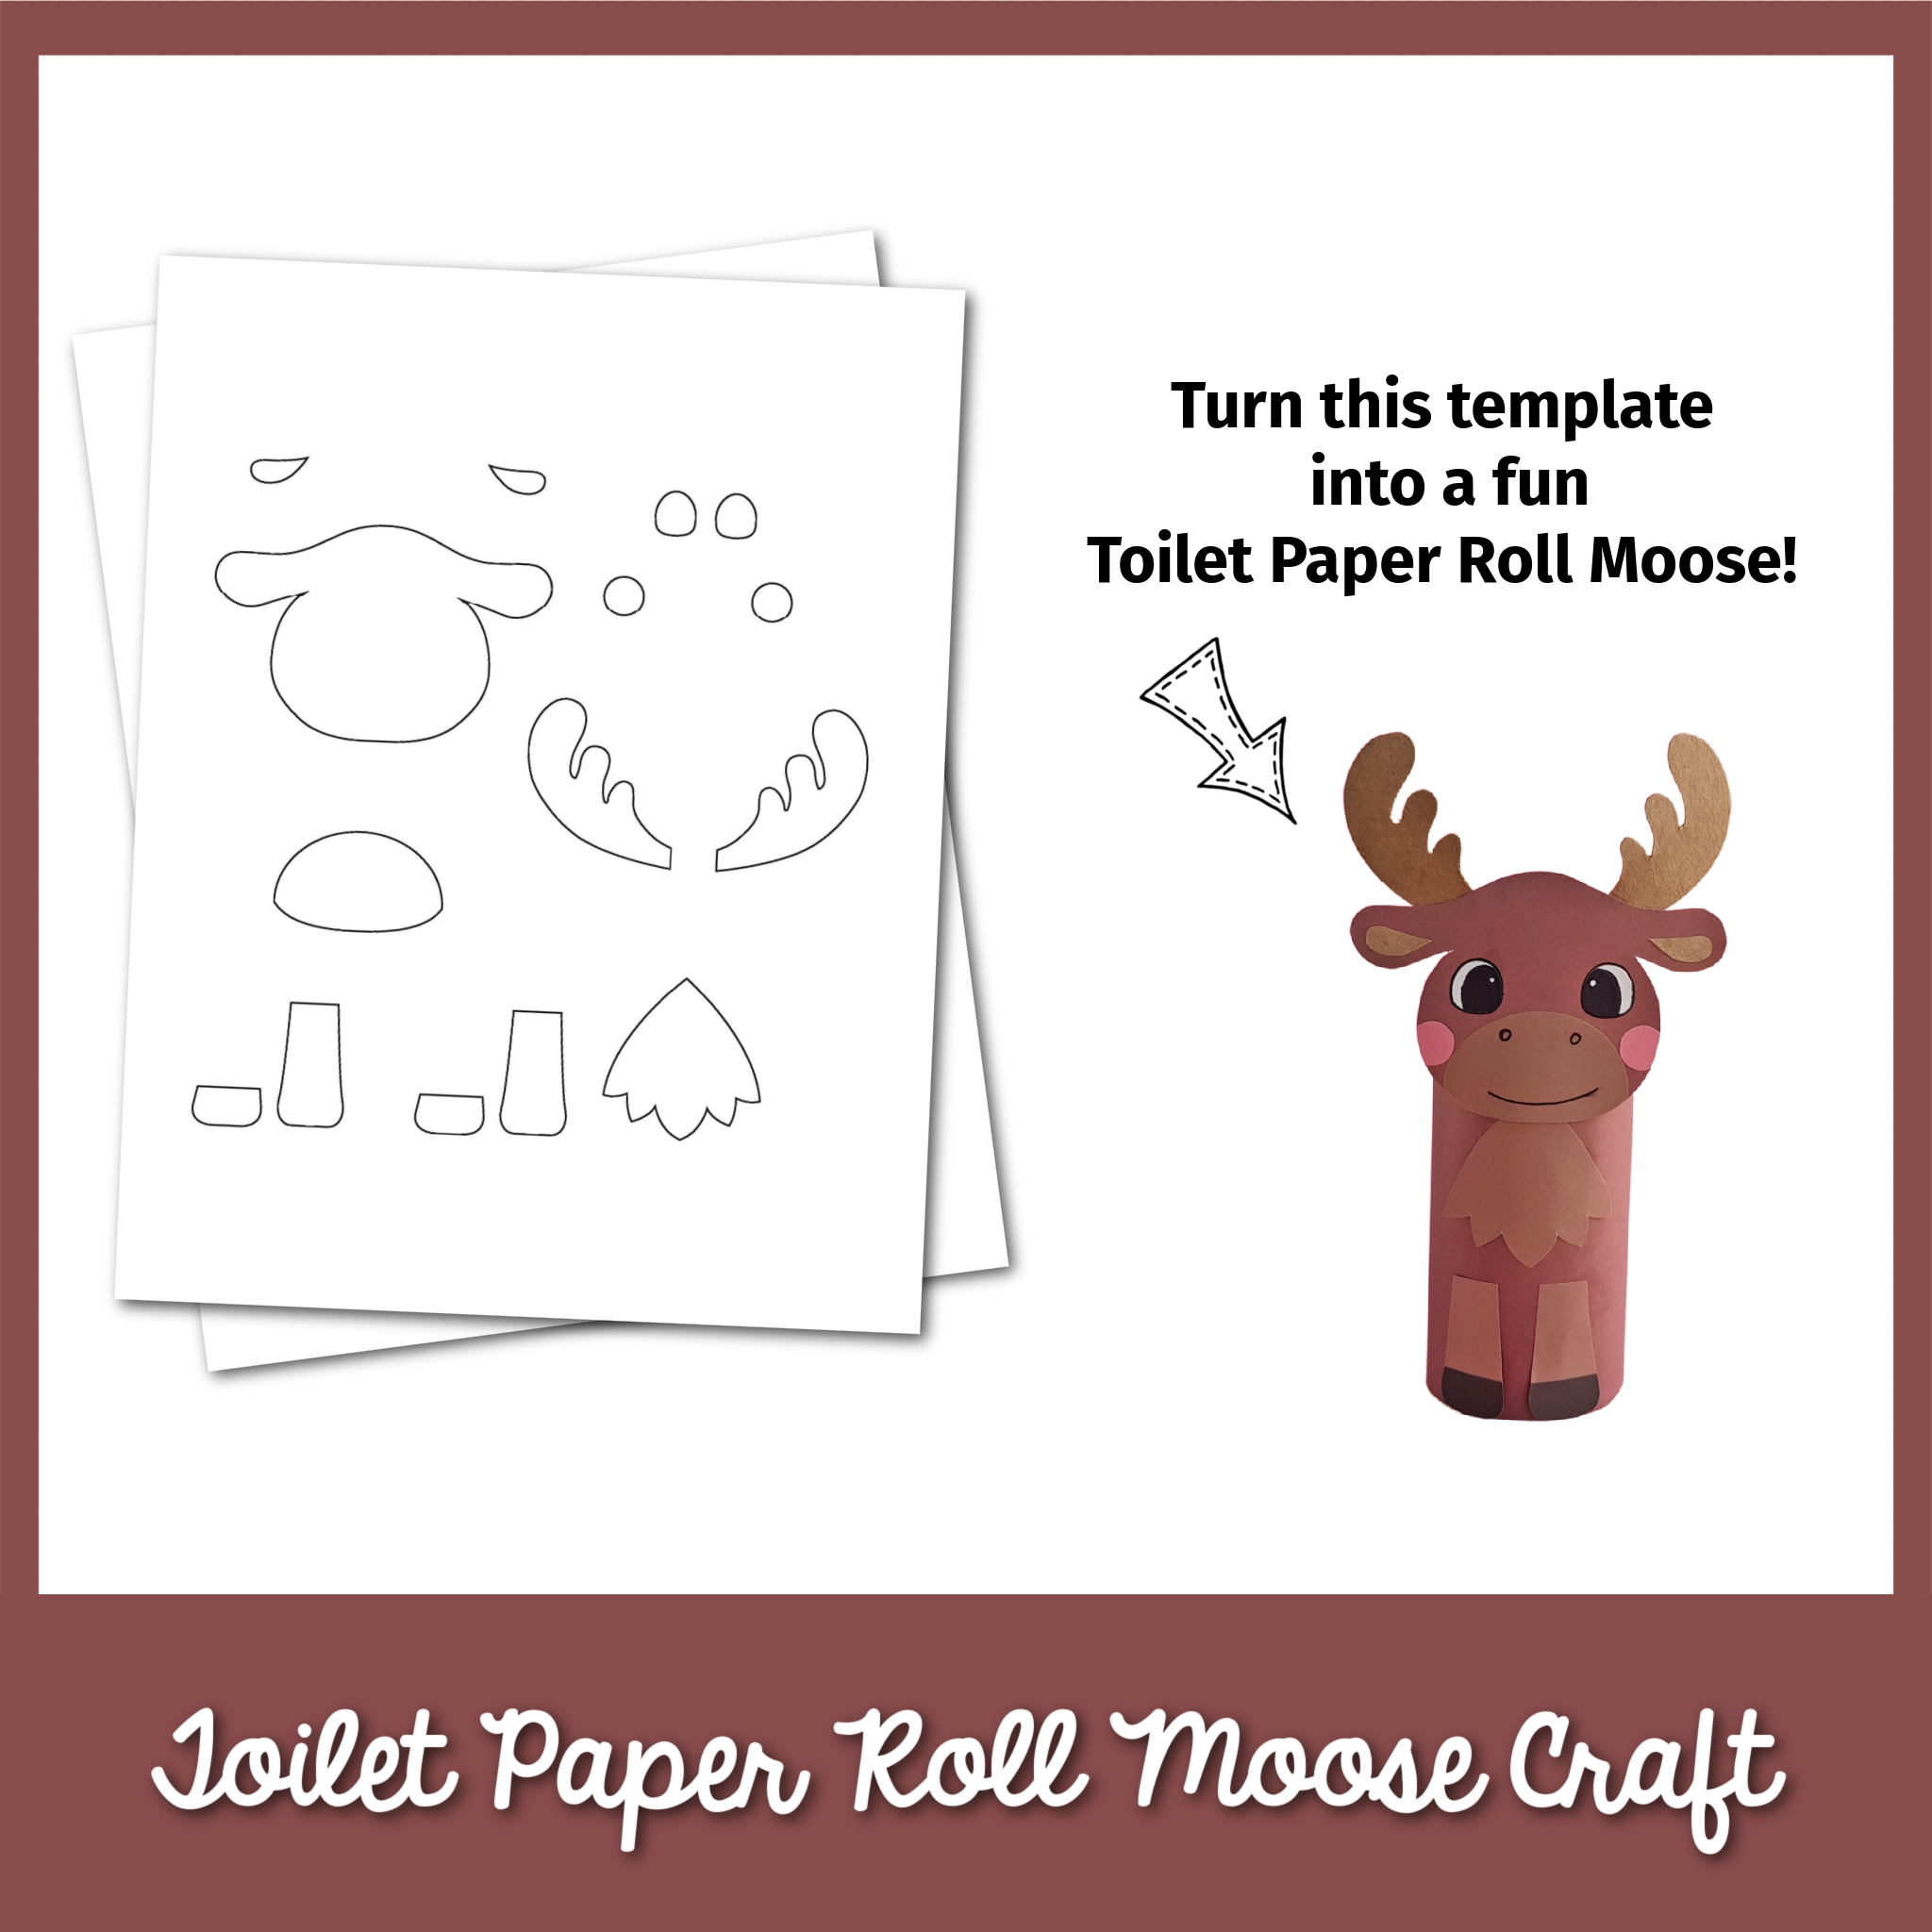 Toilet Paper Roll Moose Craft Template